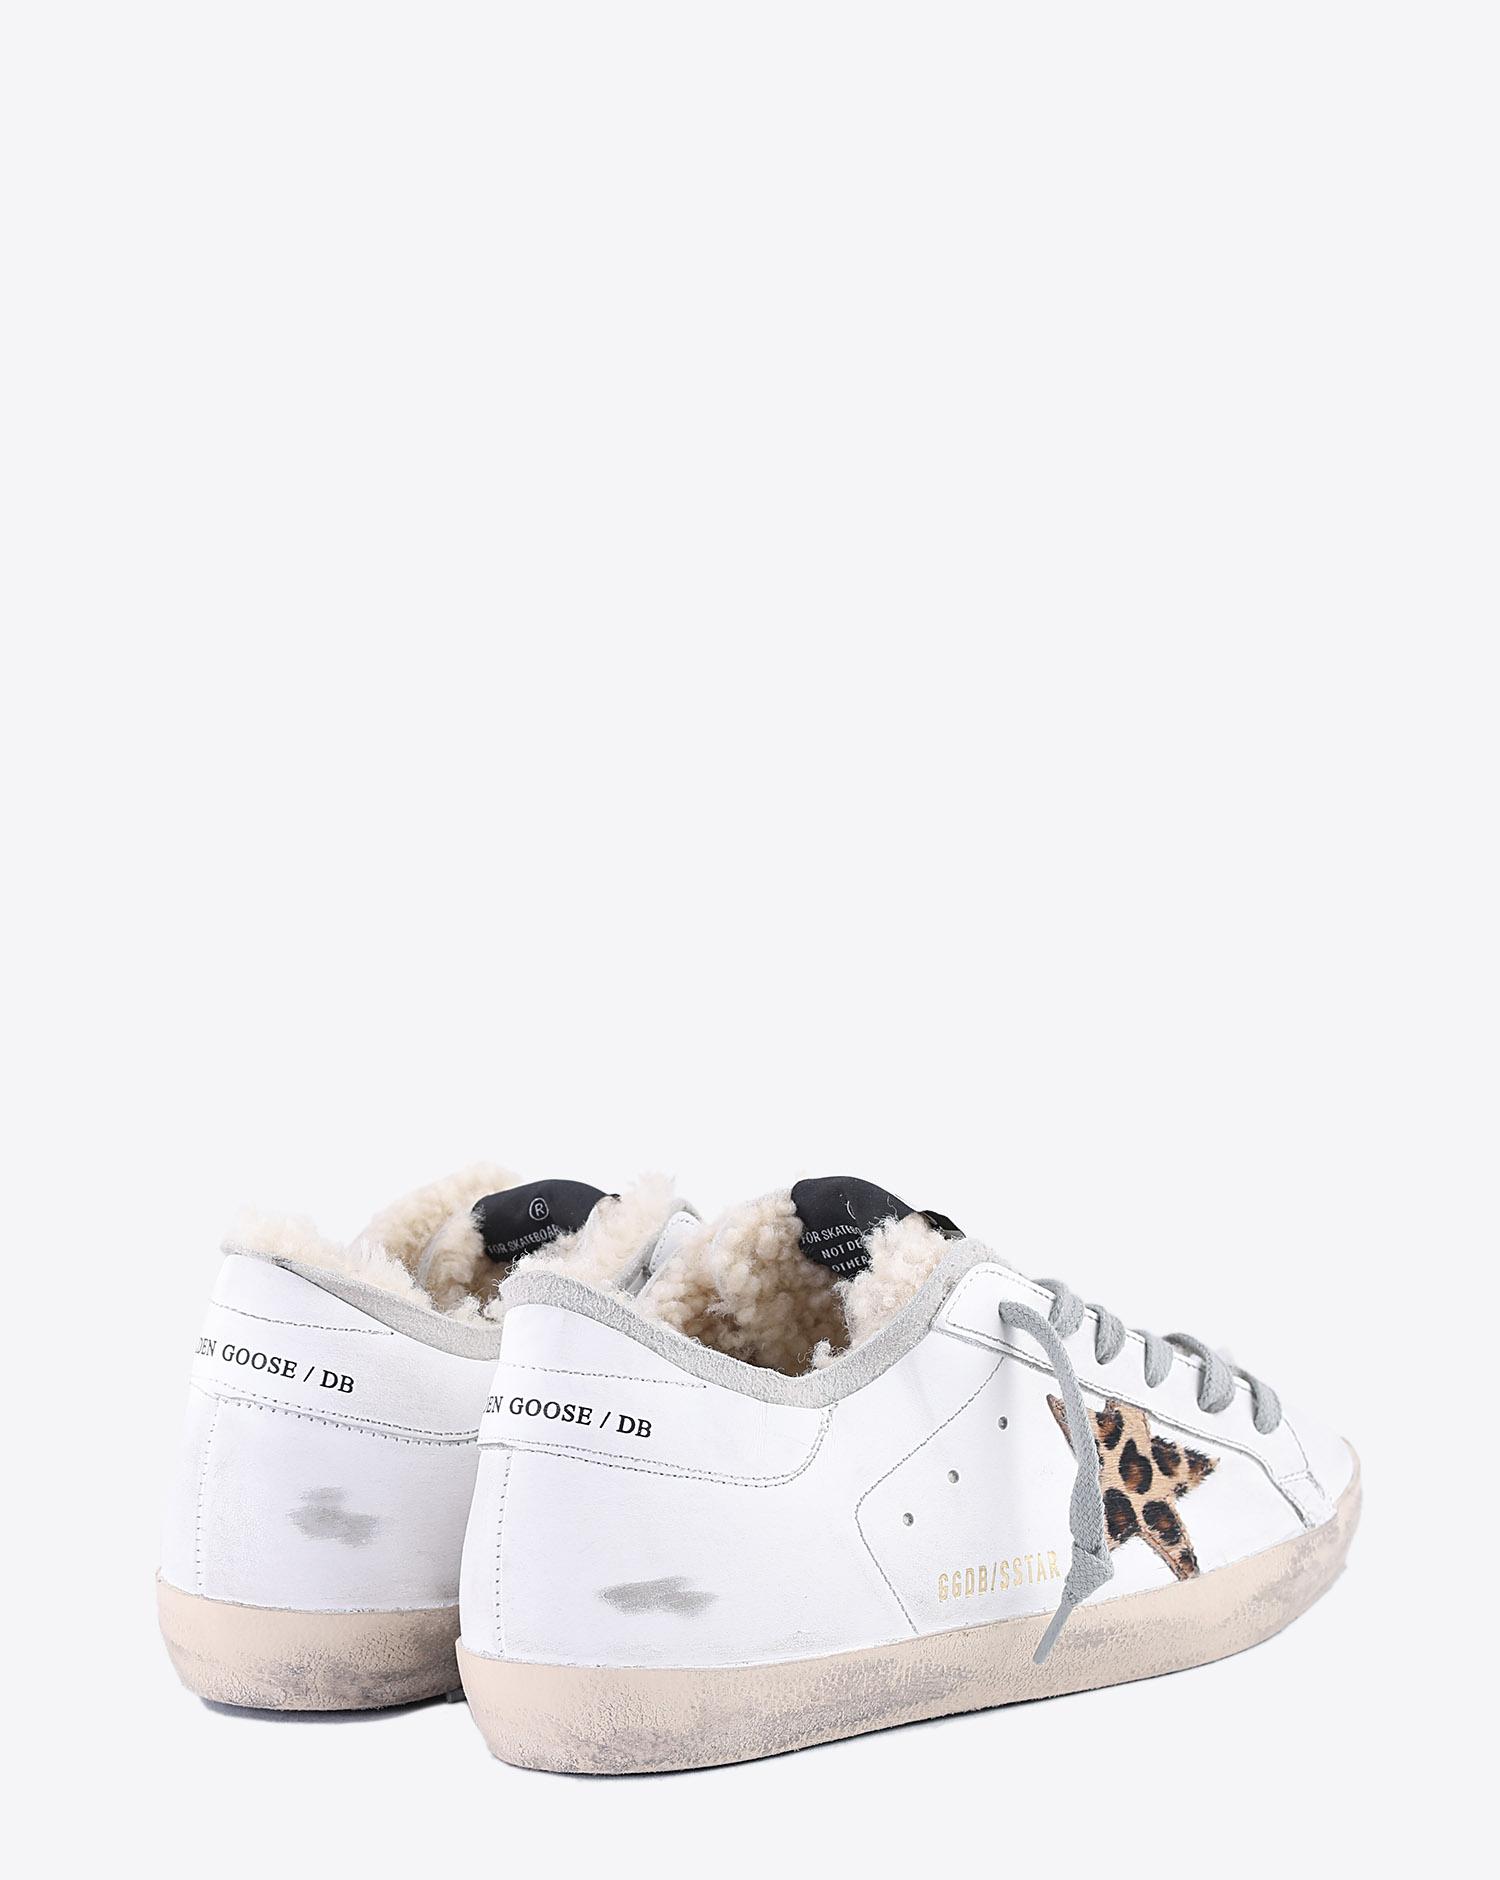 Golden Goose Woman Collection Sneakers Superstar - White Shearling Sock - Leopard Star  